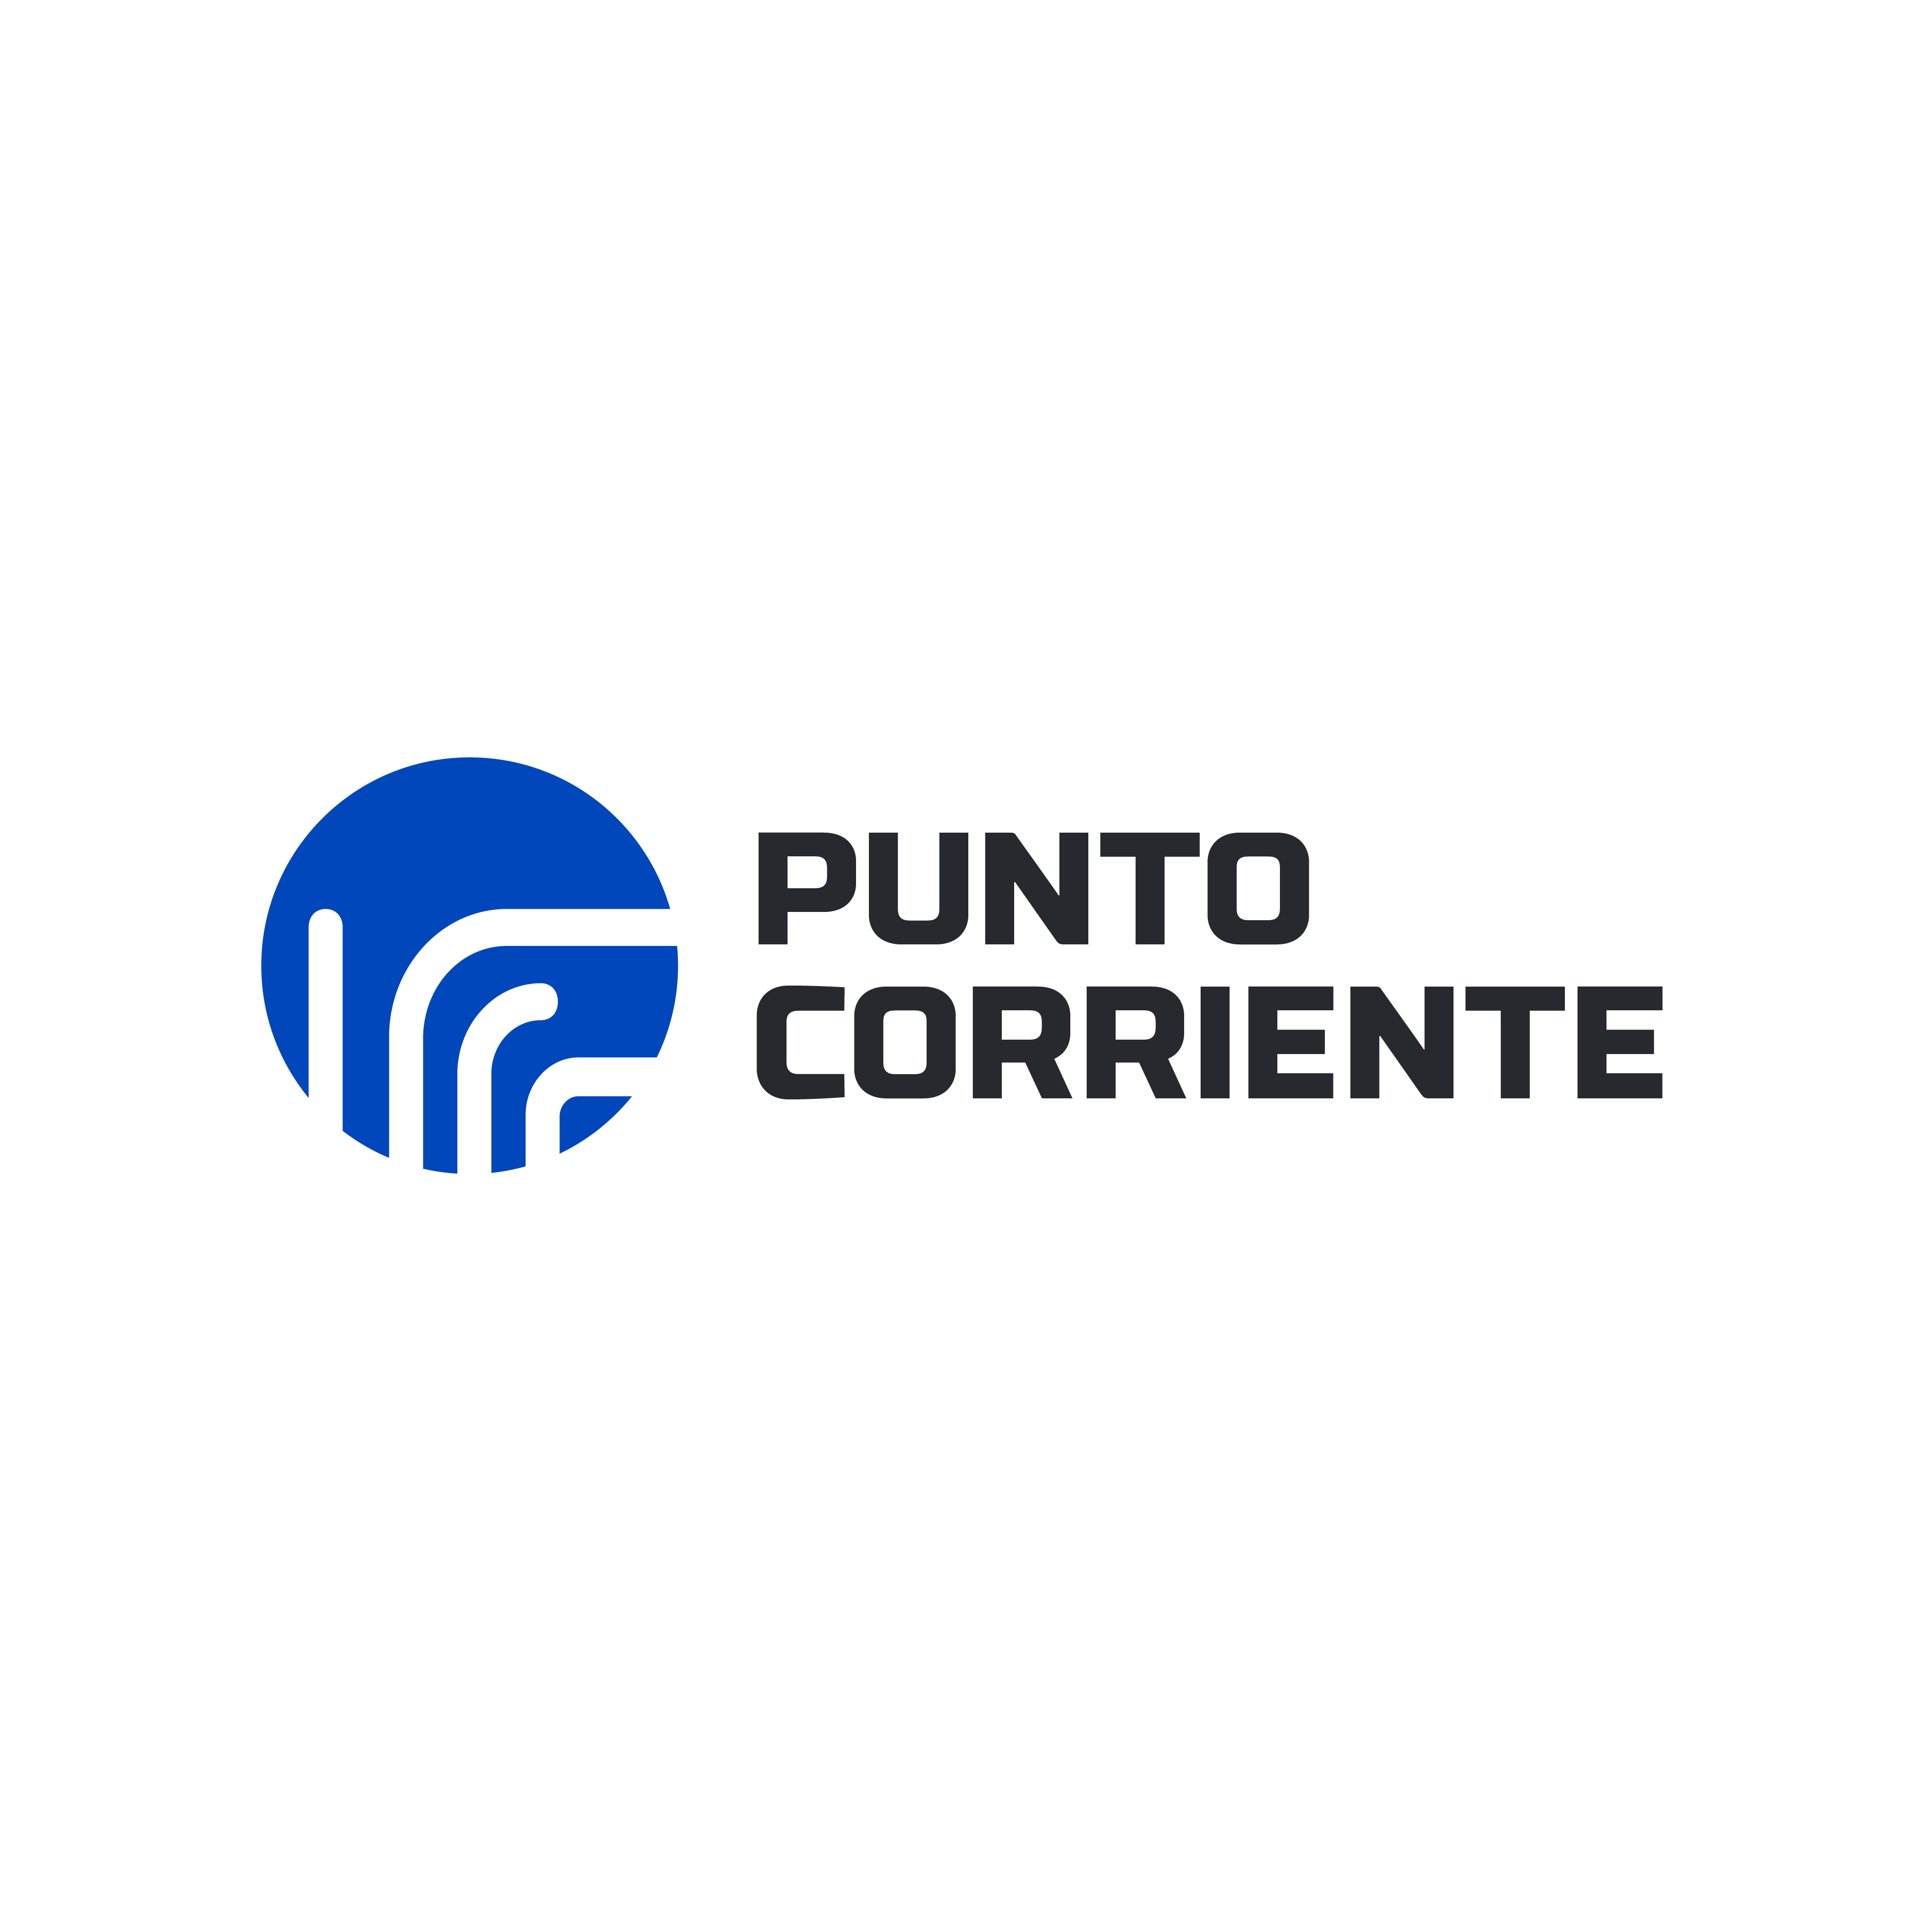 Punto Corriente  logo design by logo designer Anthony Alava for your inspiration and for the worlds largest logo competition